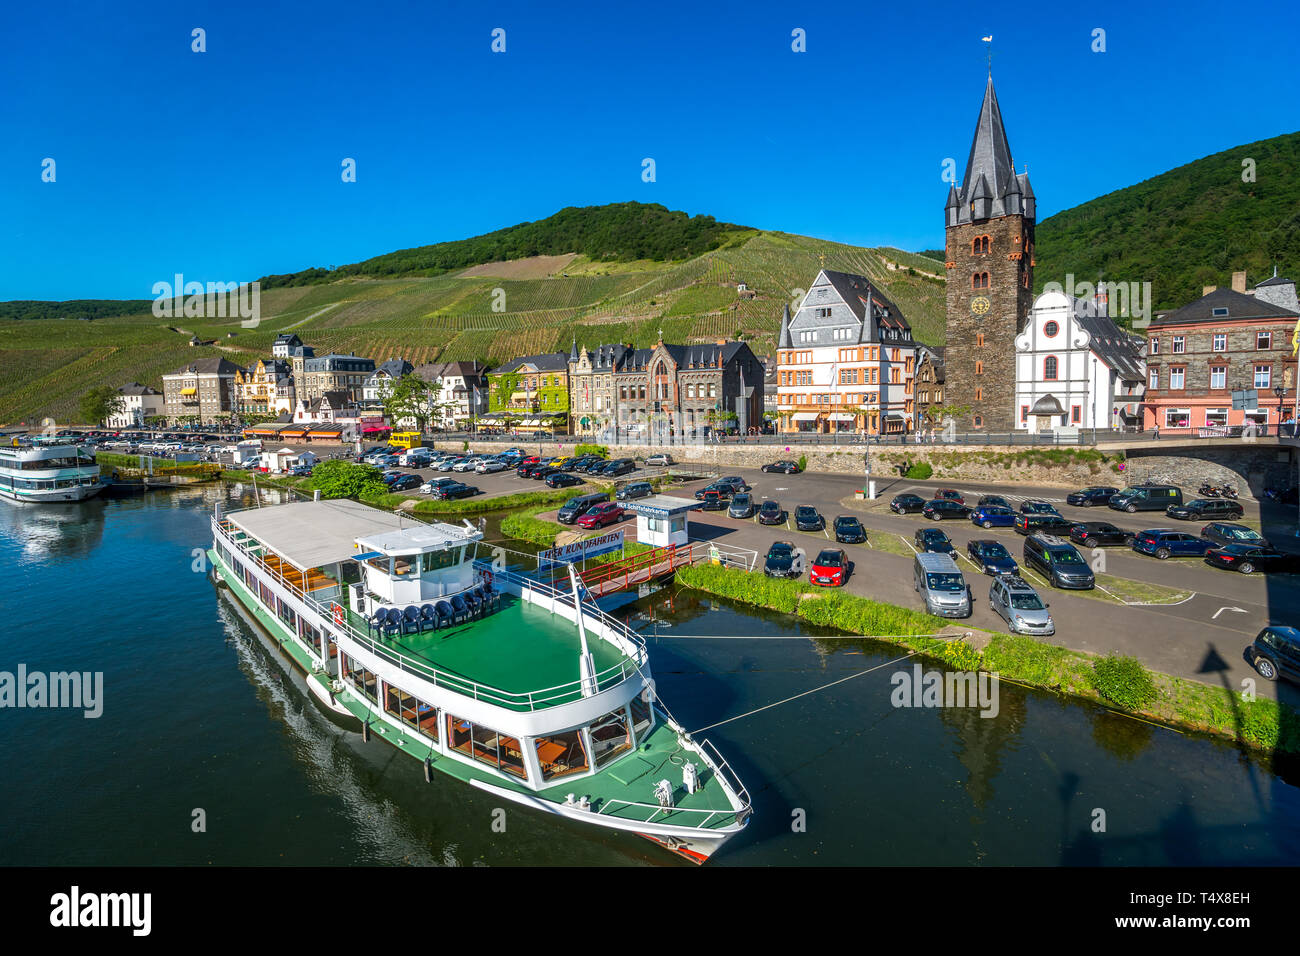 Bernkastel Kues in Moselle Valley, Germany Stock Photo